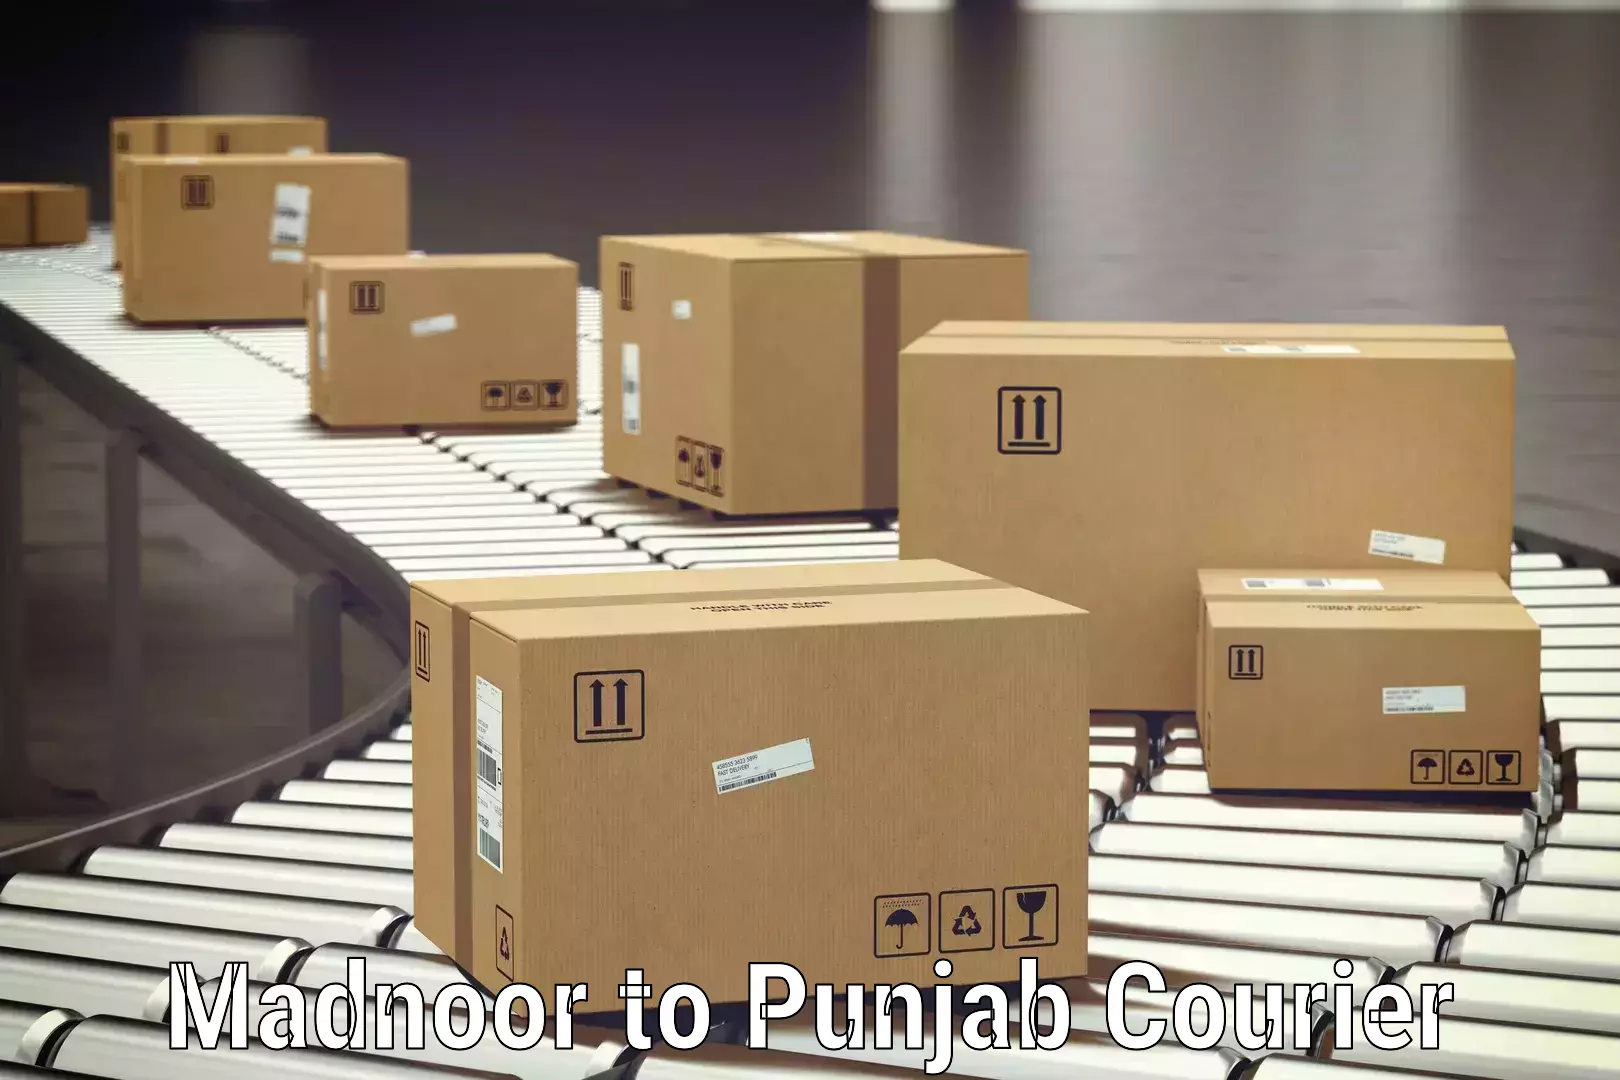 Baggage delivery scheduling Madnoor to Punjab